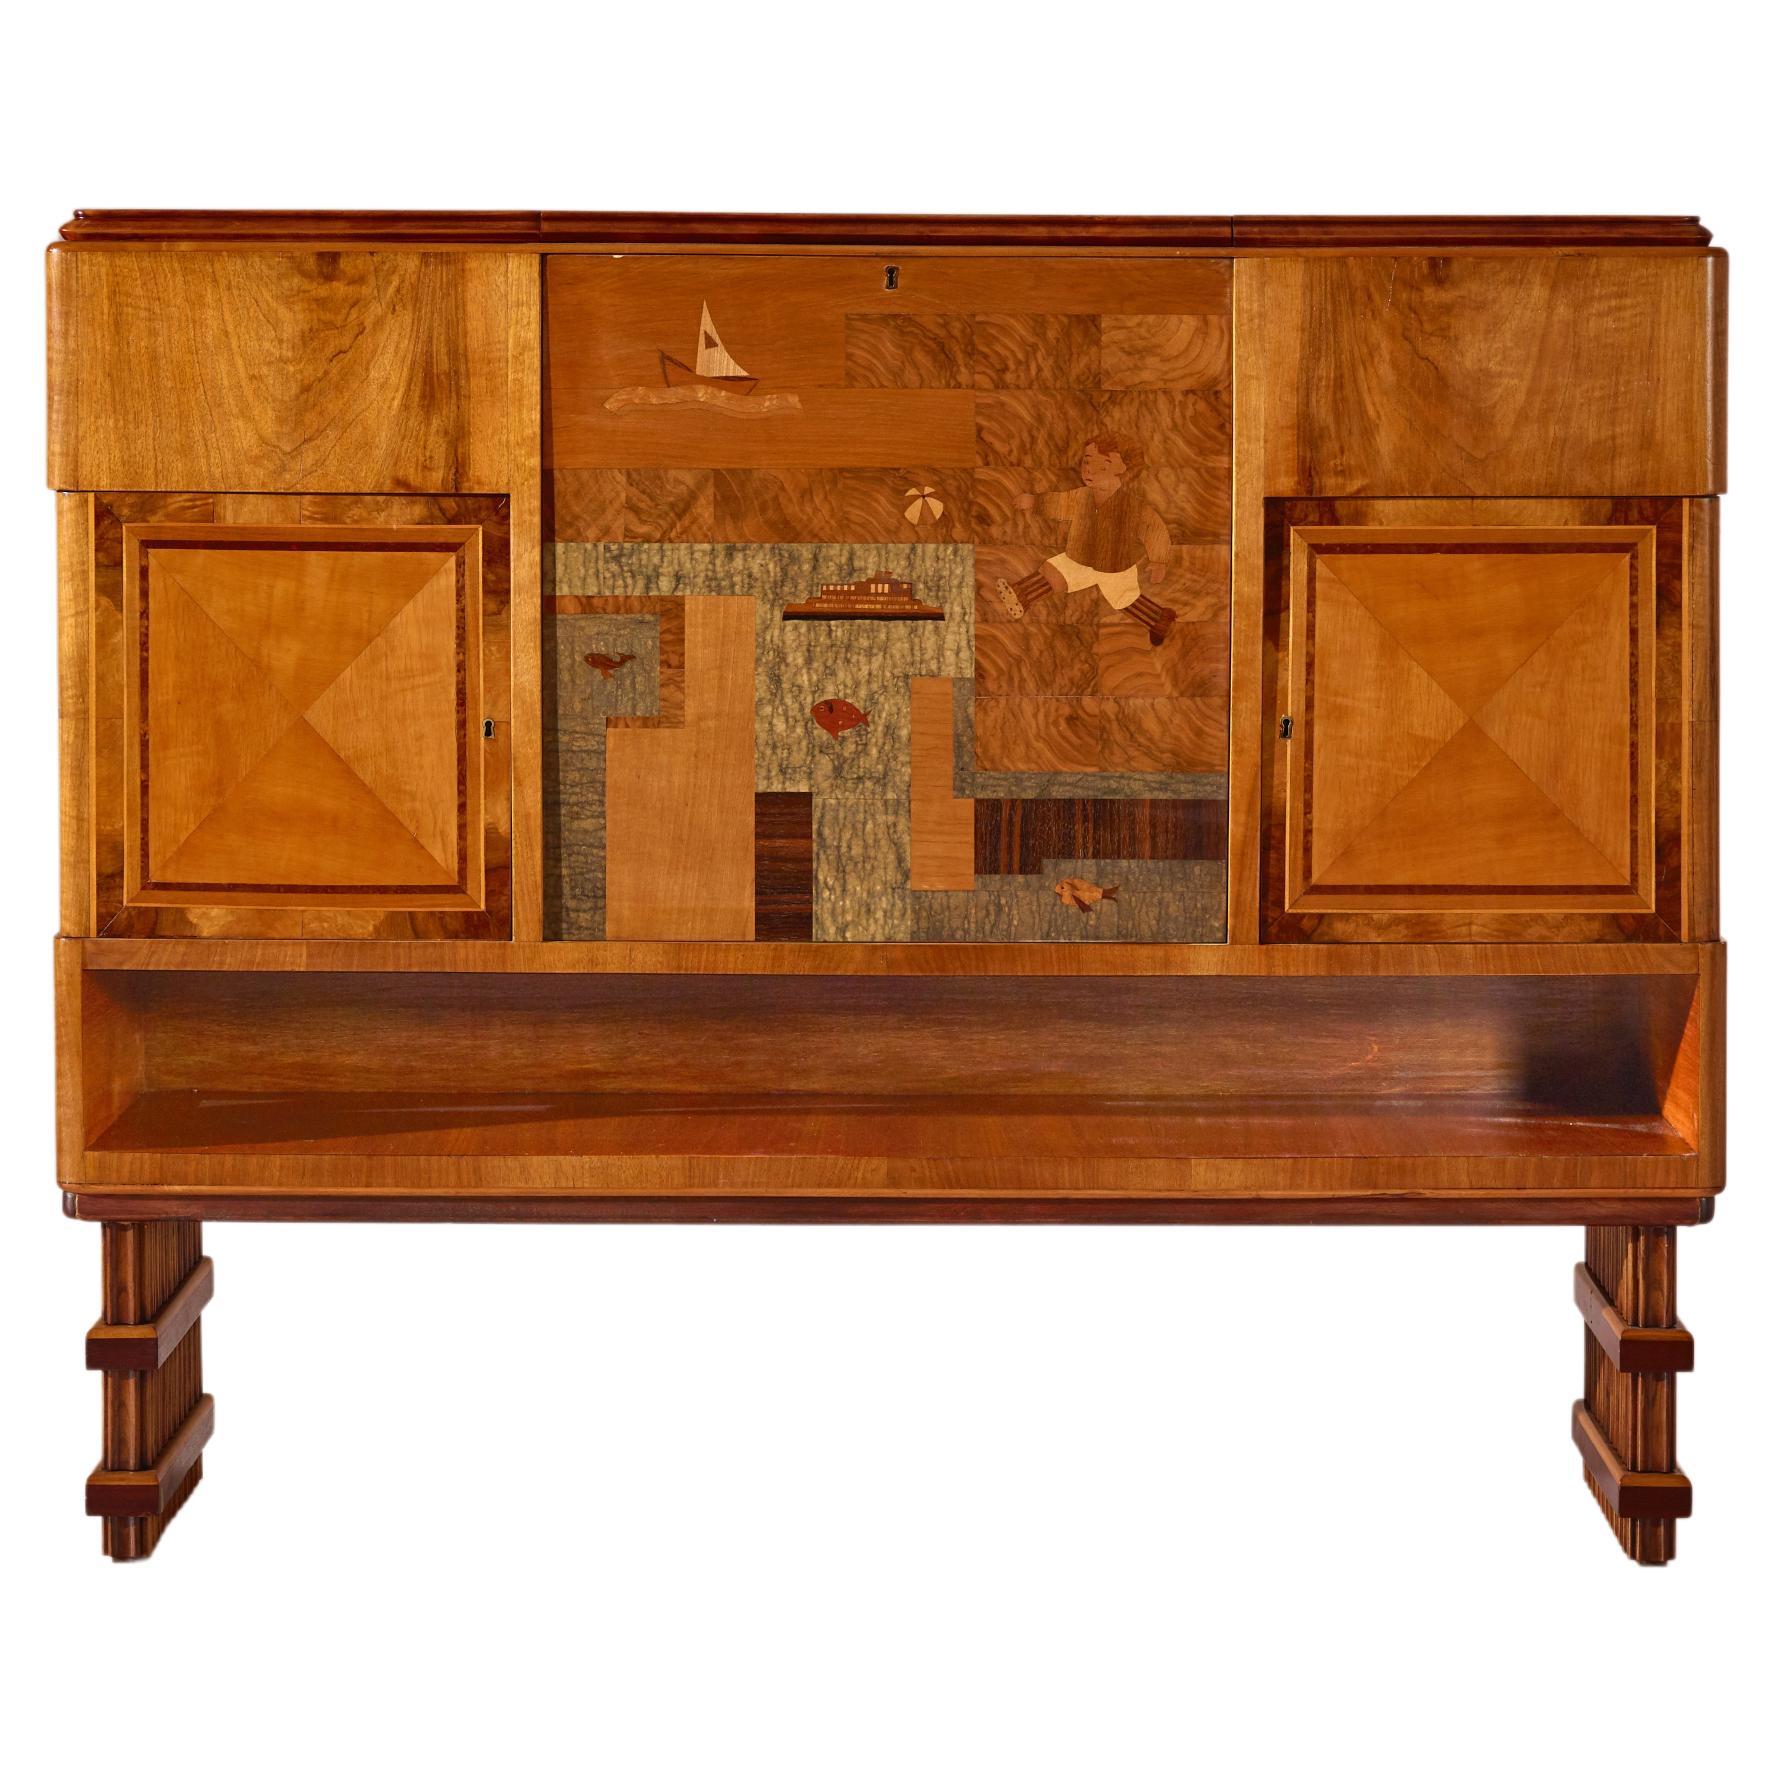 Inlaid Wood Drink Cabinet Produced in Italy in the 1940s by Luigi Buder